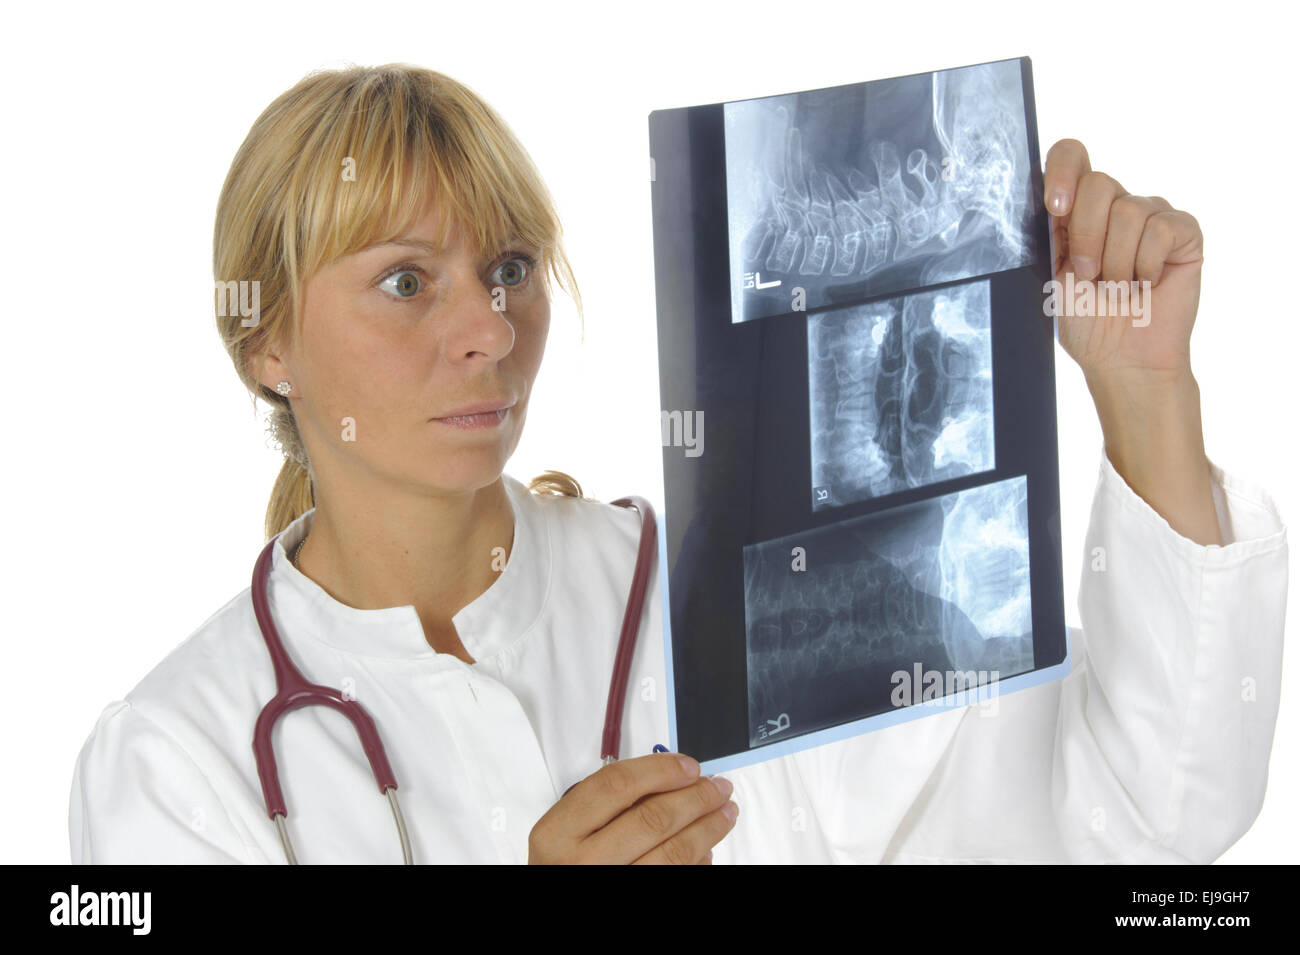 female doctor with x-ray film Stock Photo